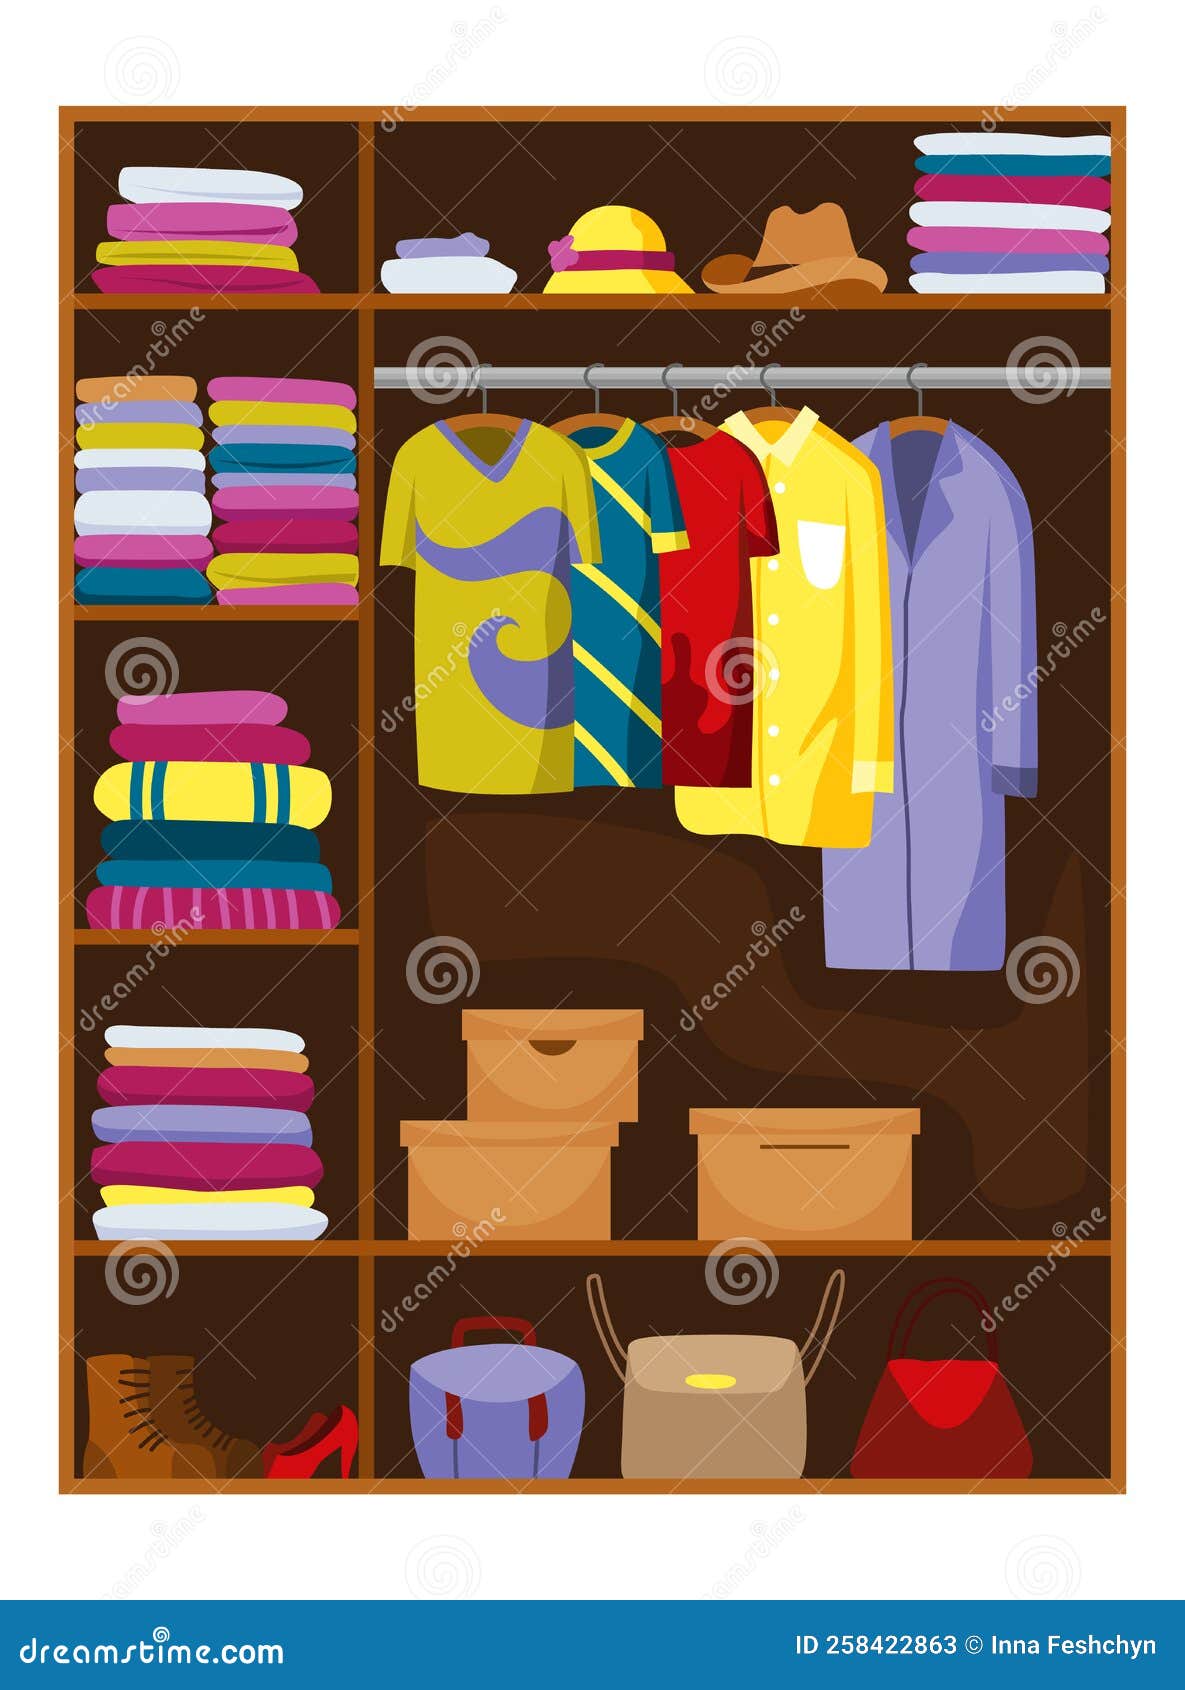 Clothes Wardrobe Room Full of Woman Clothes. Furniture with Shelves for ...